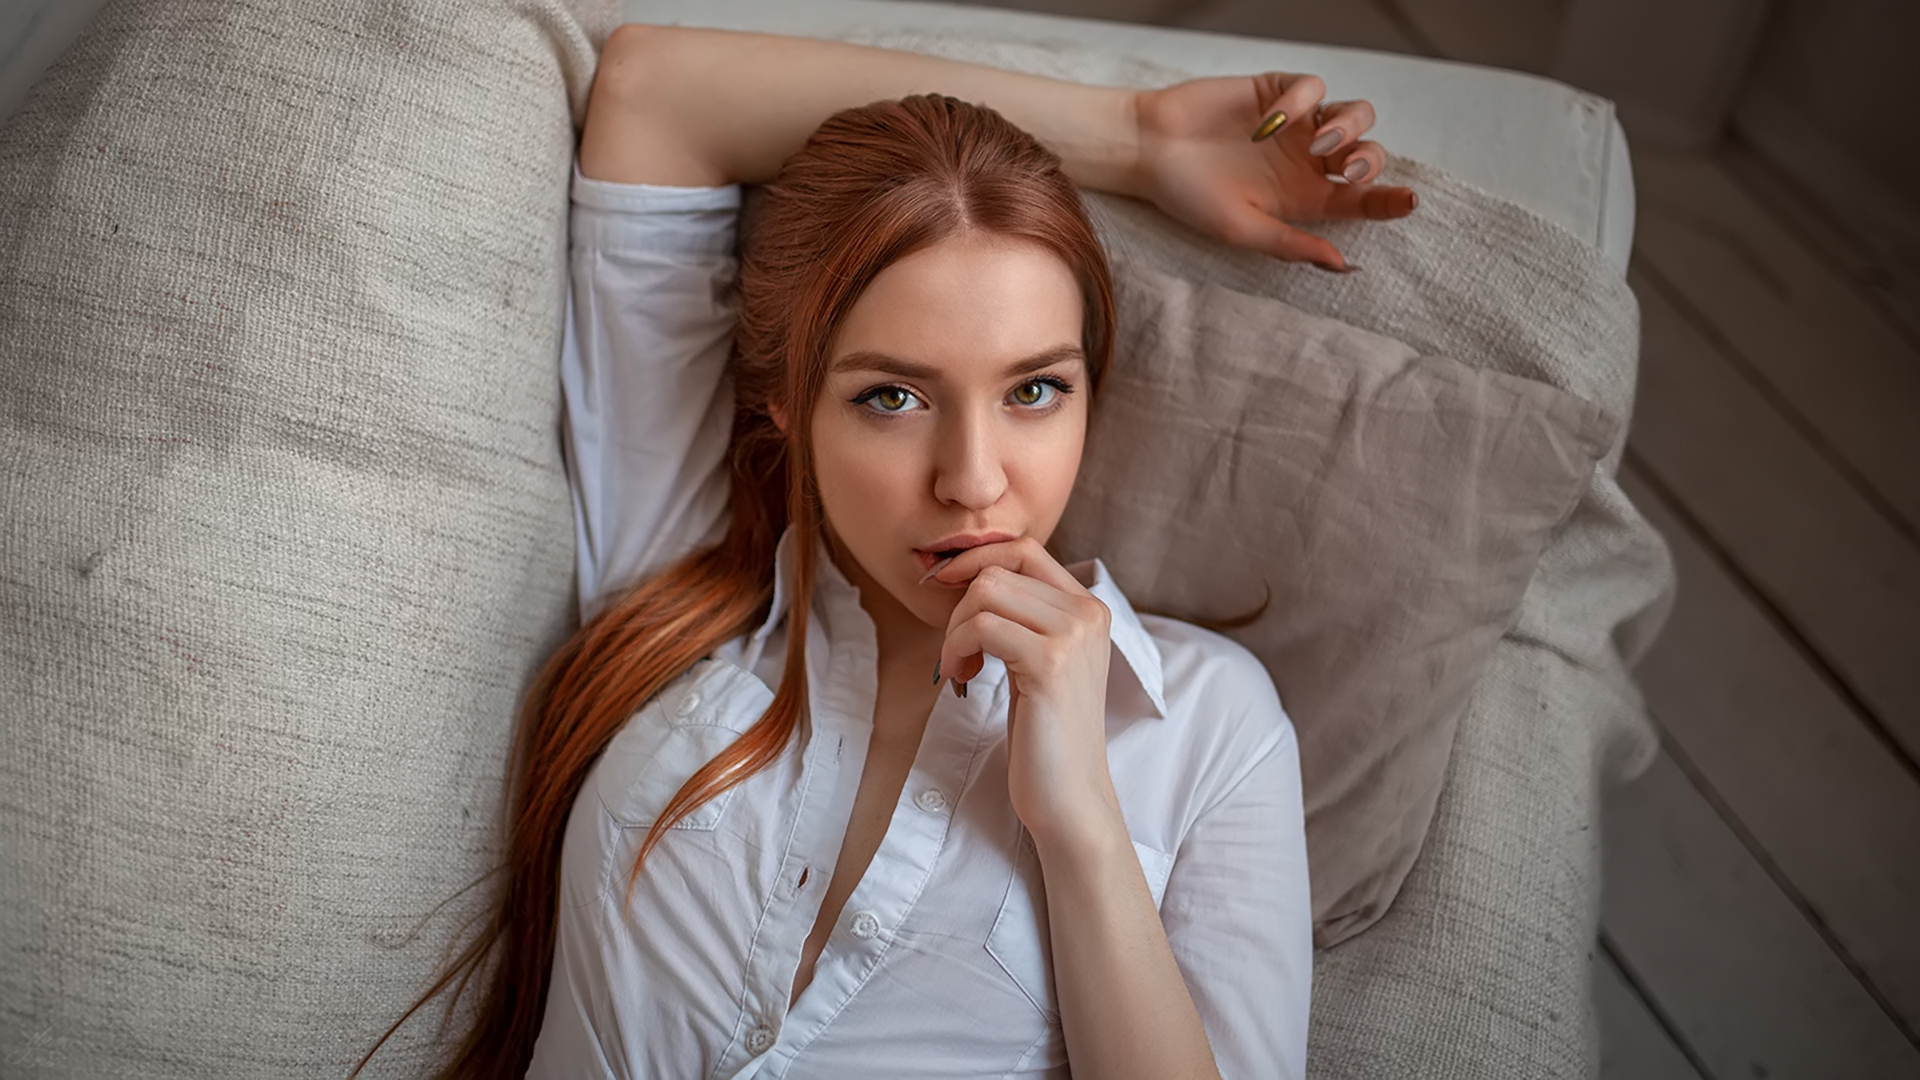 People 1920x1080 women face portrait redhead white shirt finger on lips painted nails long hair couch top view looking at viewer no bra cleavage